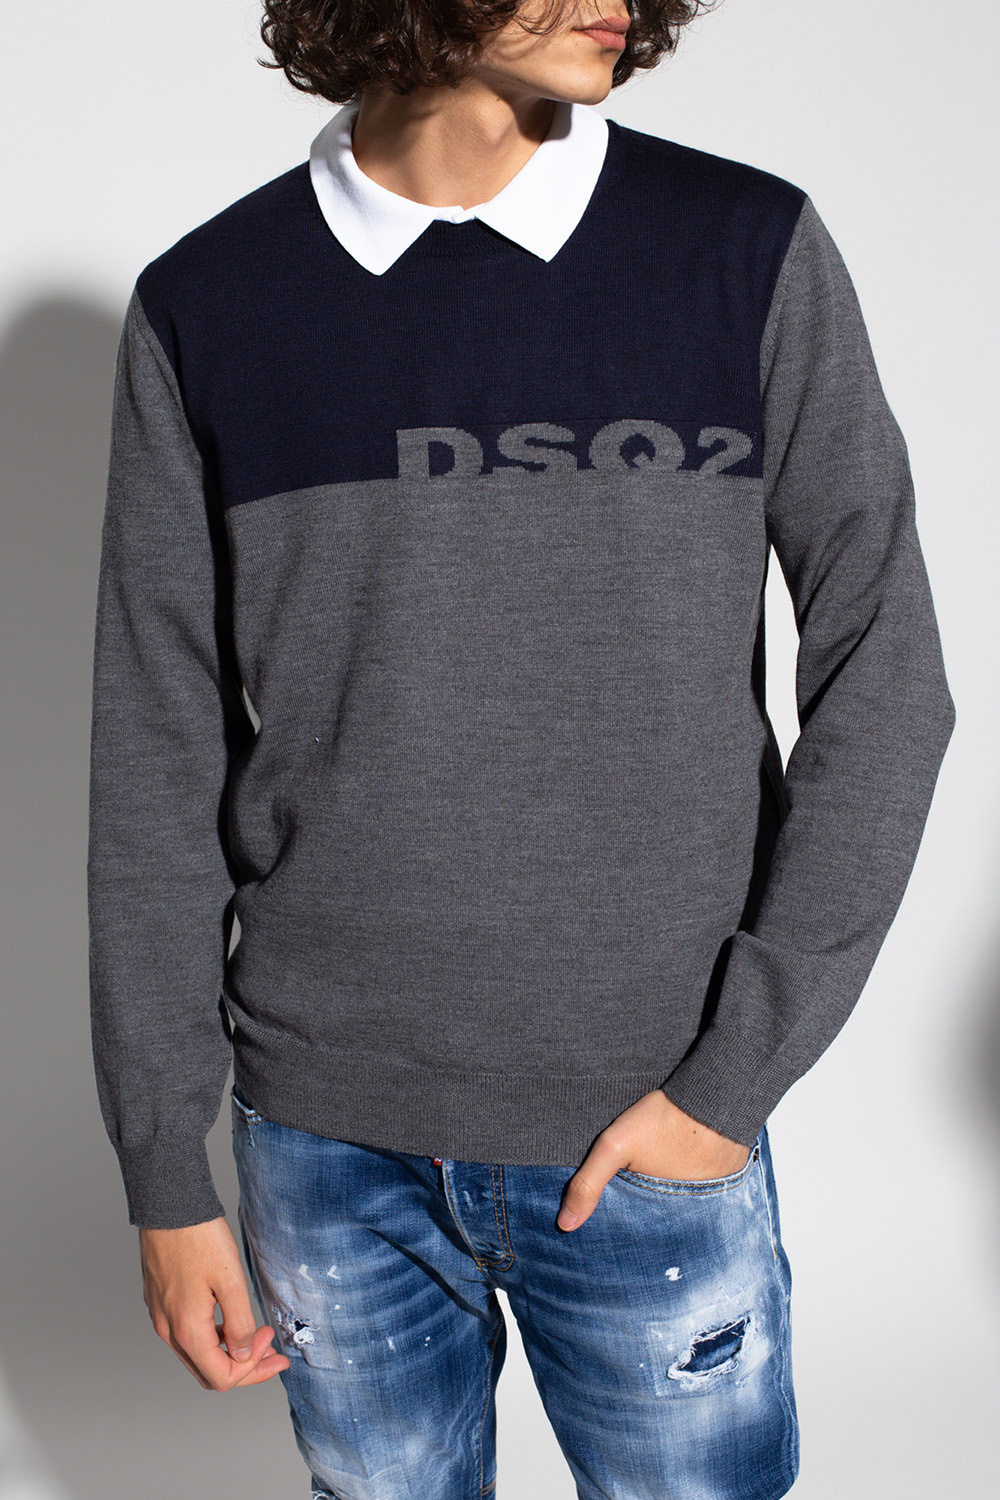 Dsquared2 Logo-embroidered sweater